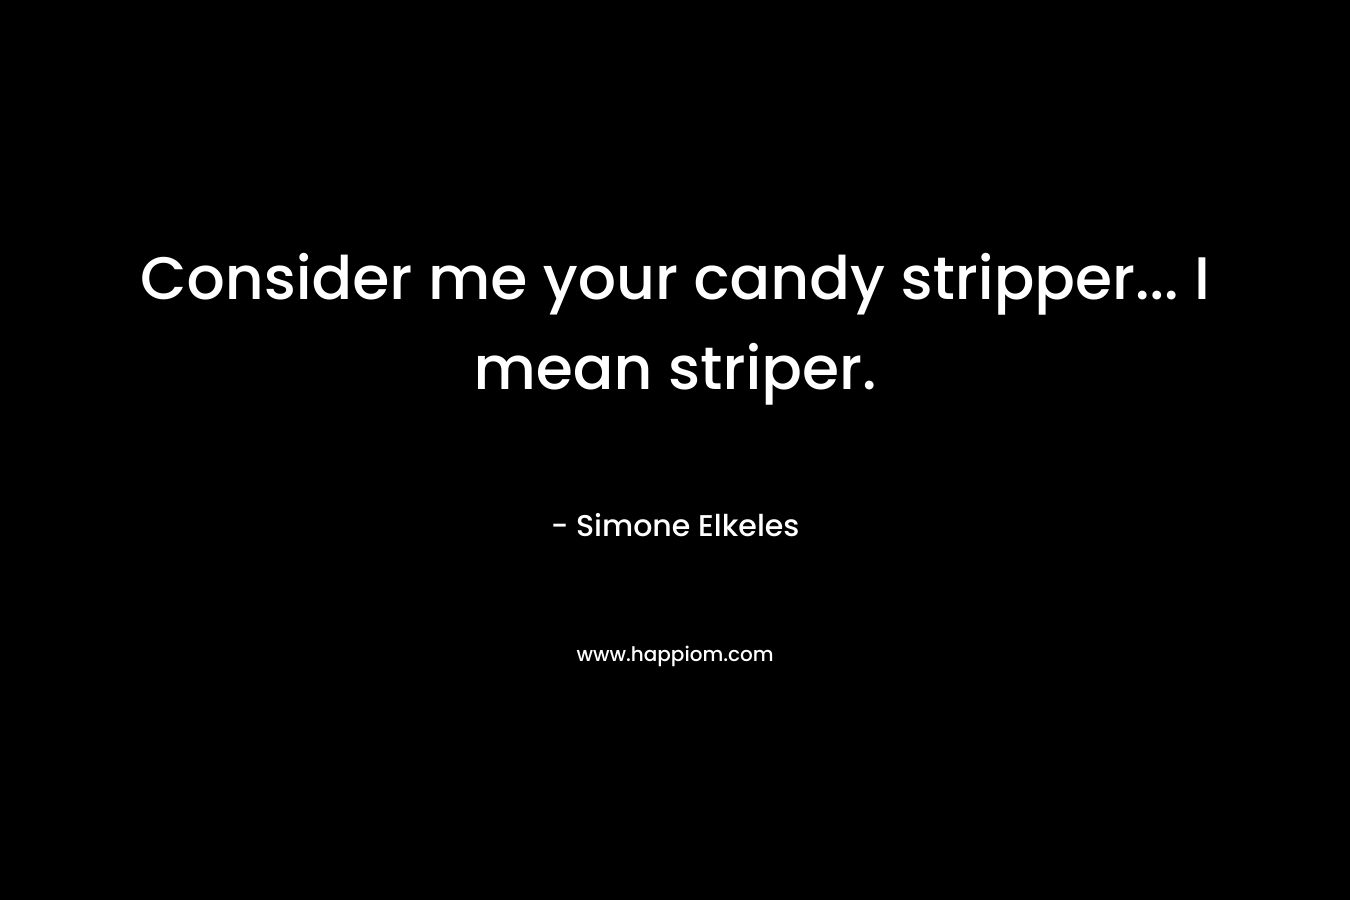 Consider me your candy stripper... I mean striper.